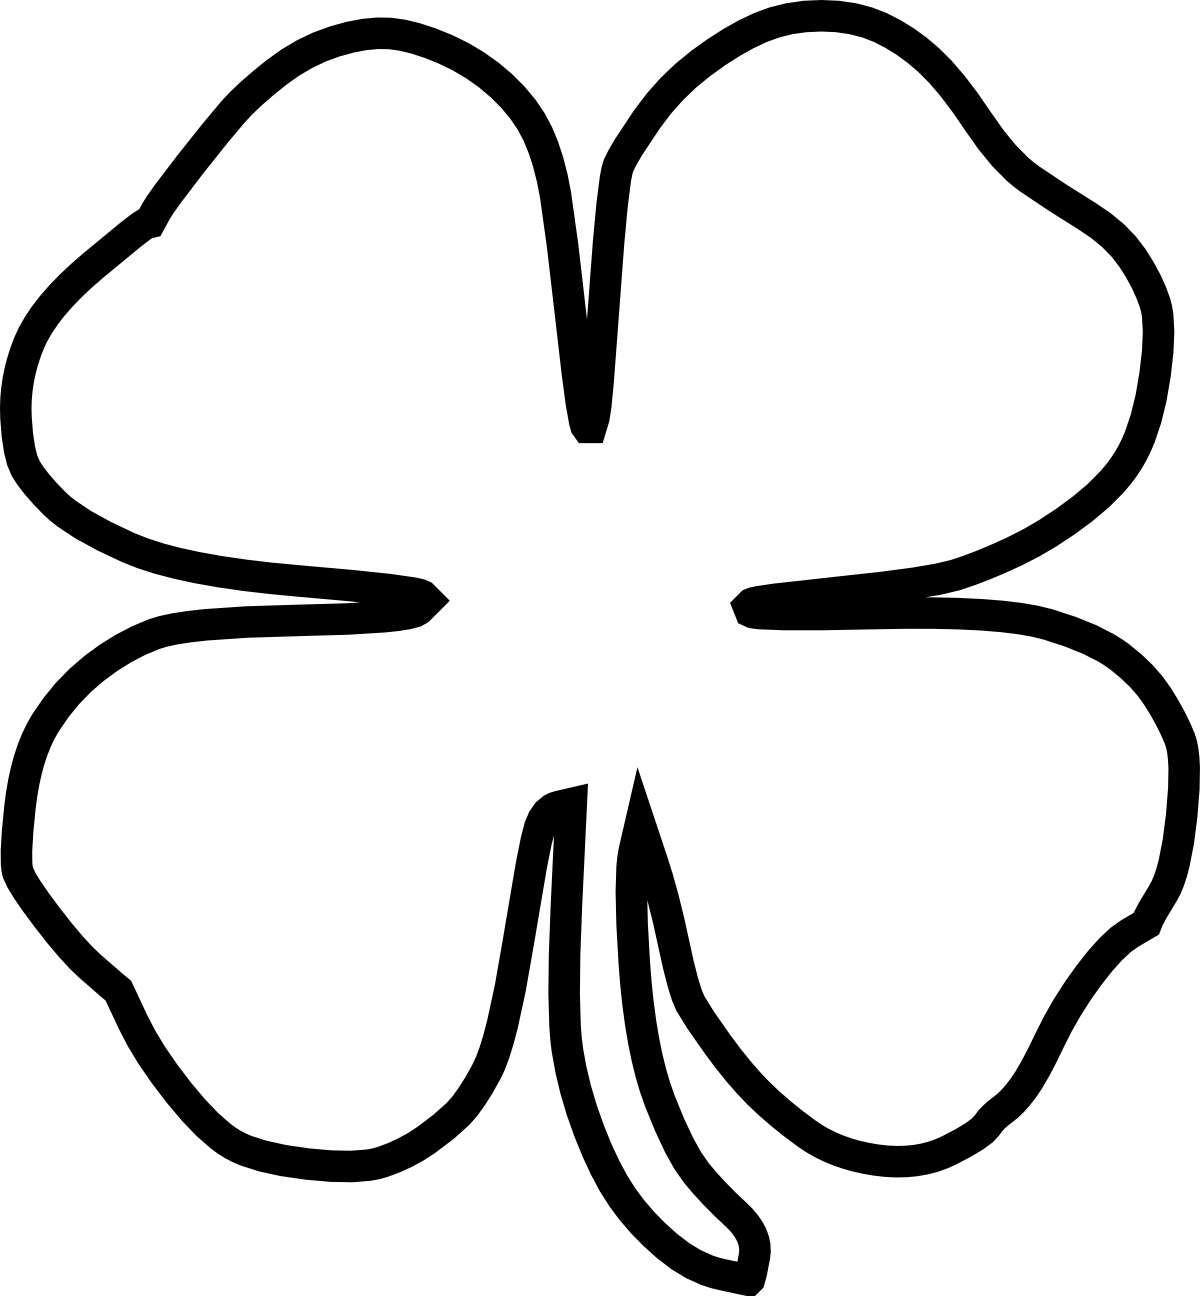 Picture Of A Four Leaf Clover - Cliparts.co